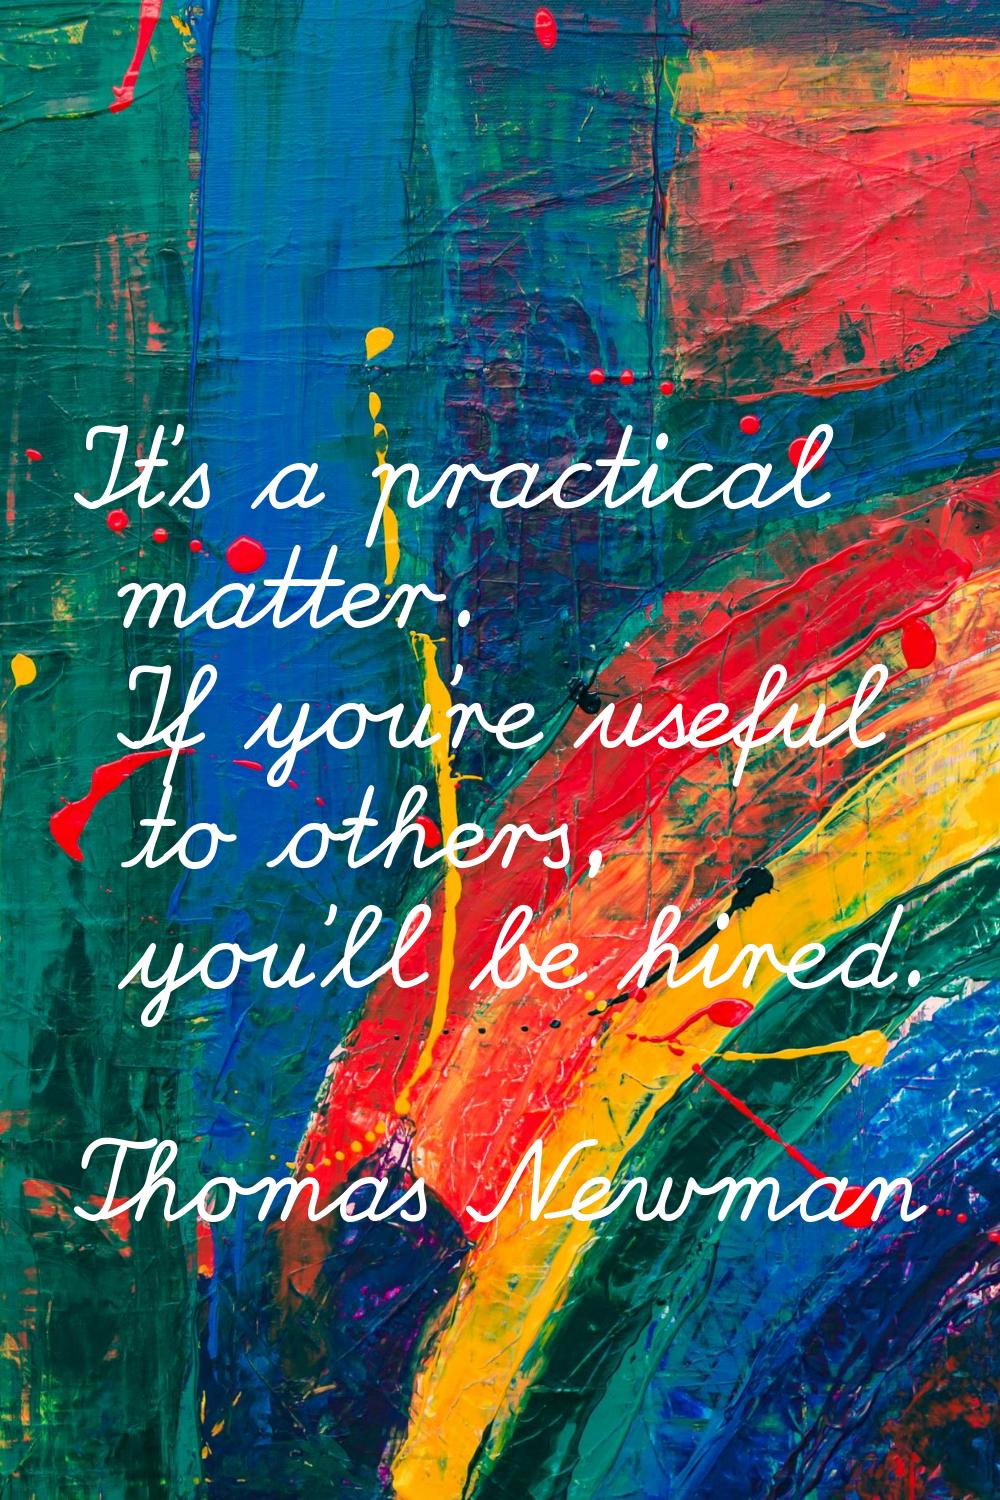 It's a practical matter. If you're useful to others, you'll be hired.